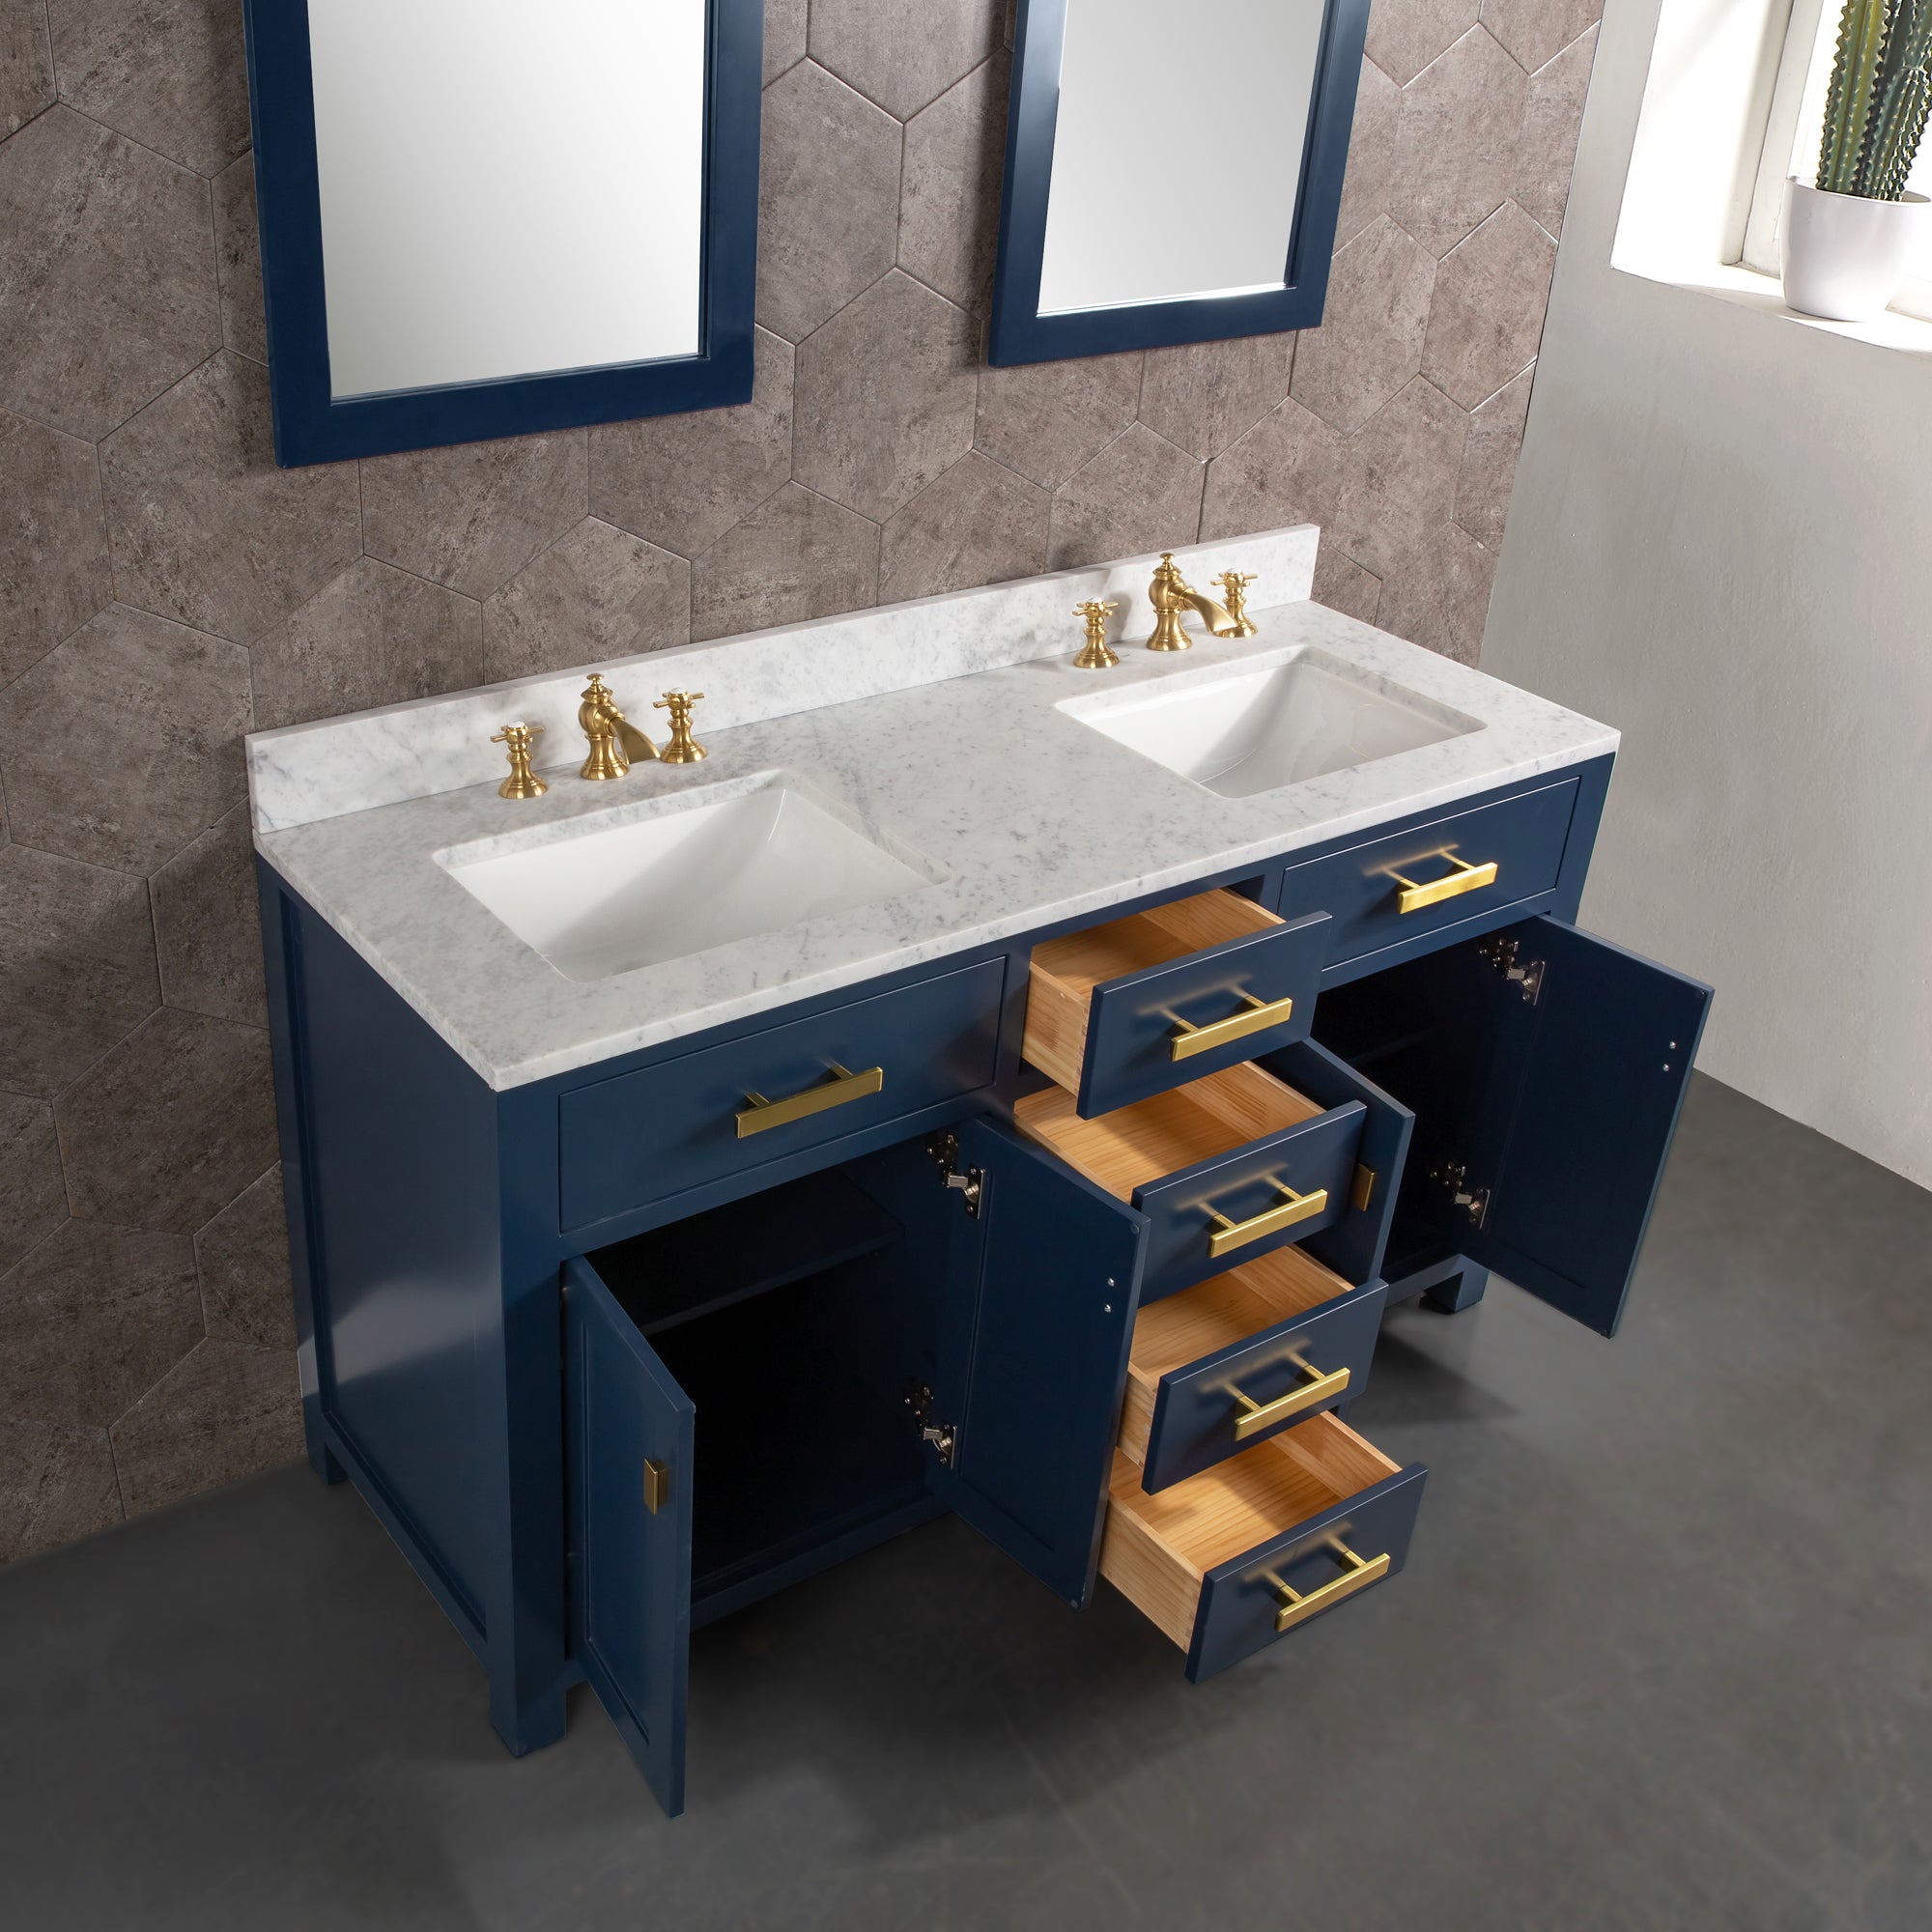 Water Creation | Madison 60-Inch Double Sink Carrara White Marble Vanity In Monarch BlueWith Matching Mirror(s) and F2-0013-06-FX Lavatory Faucet(s) | MS60CW06MB-R21FX1306